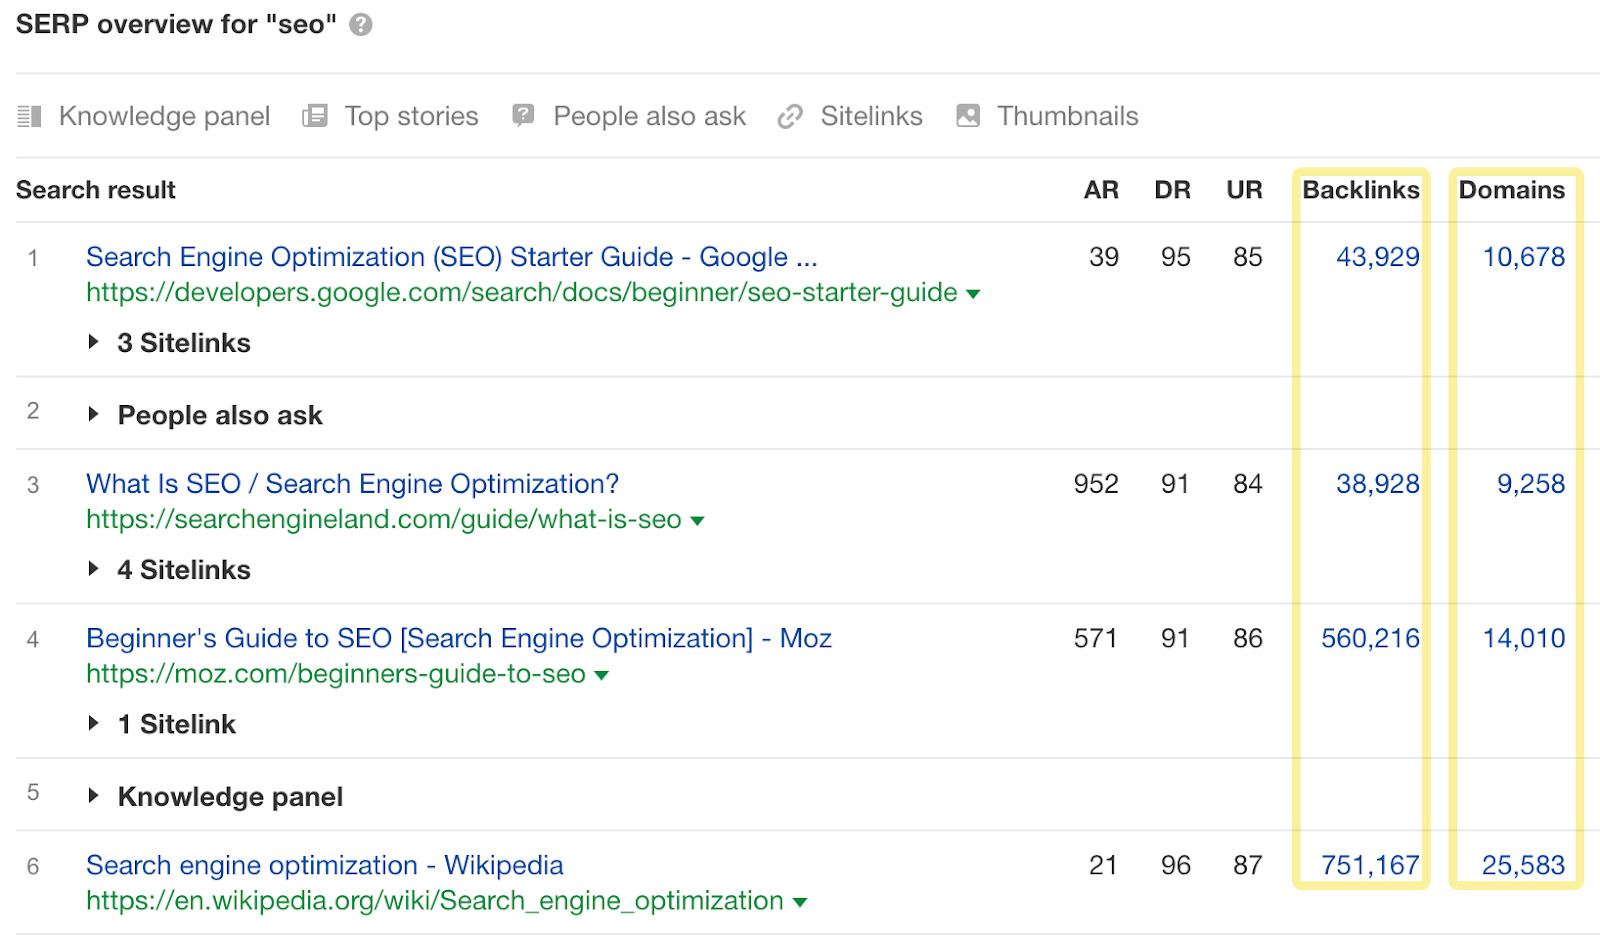 SERP overview for "seo"